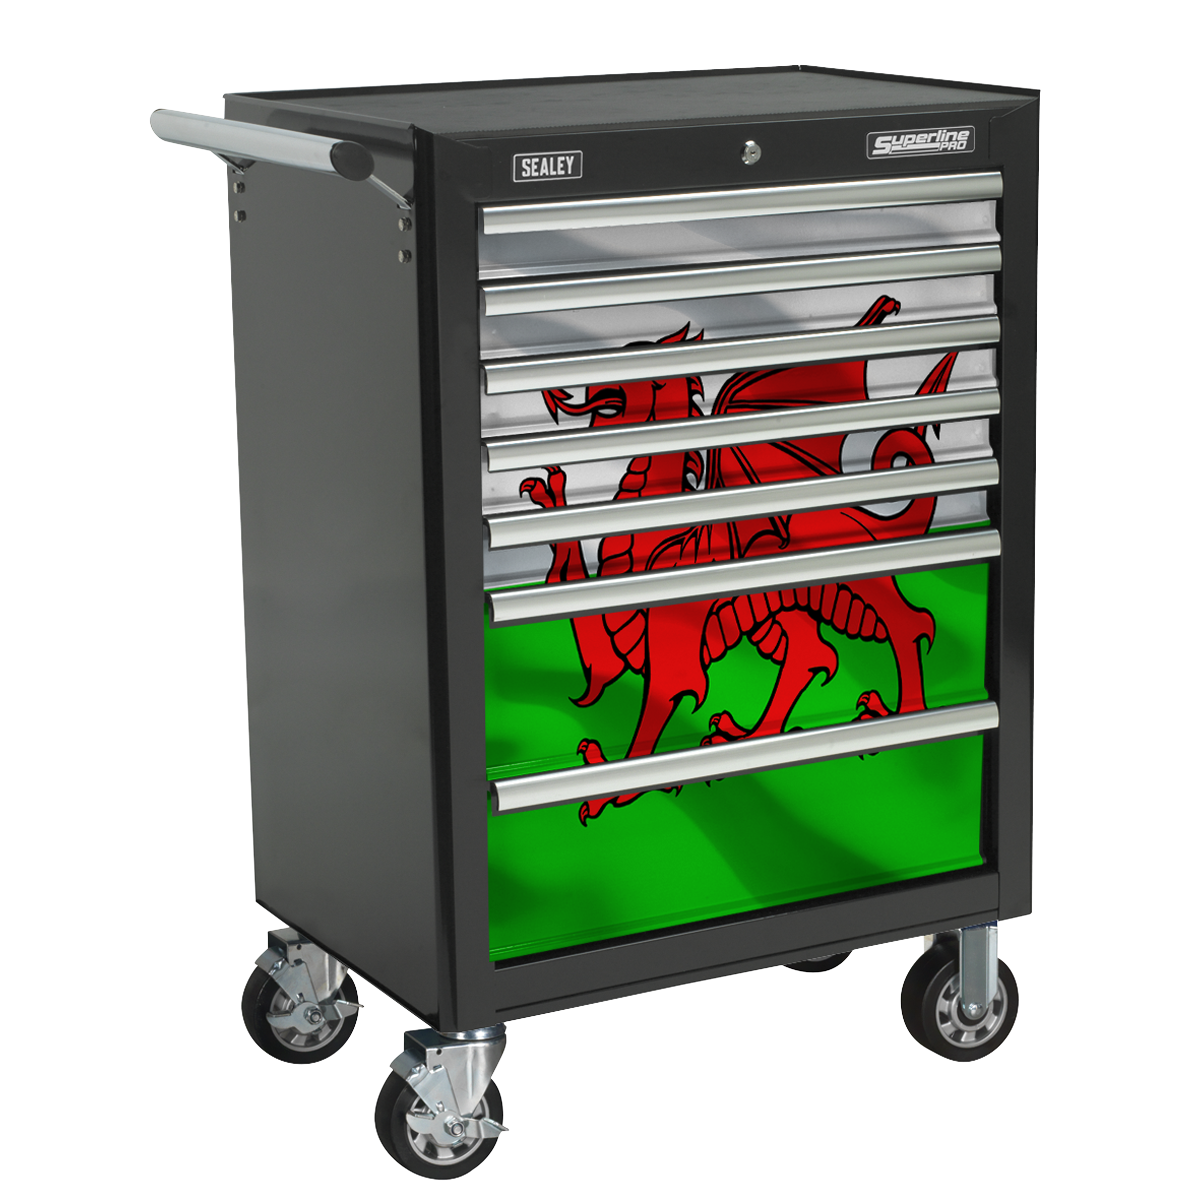 Sealey Wales Graphics 7 Drawer Rollcab Kit AP26479TBWALES